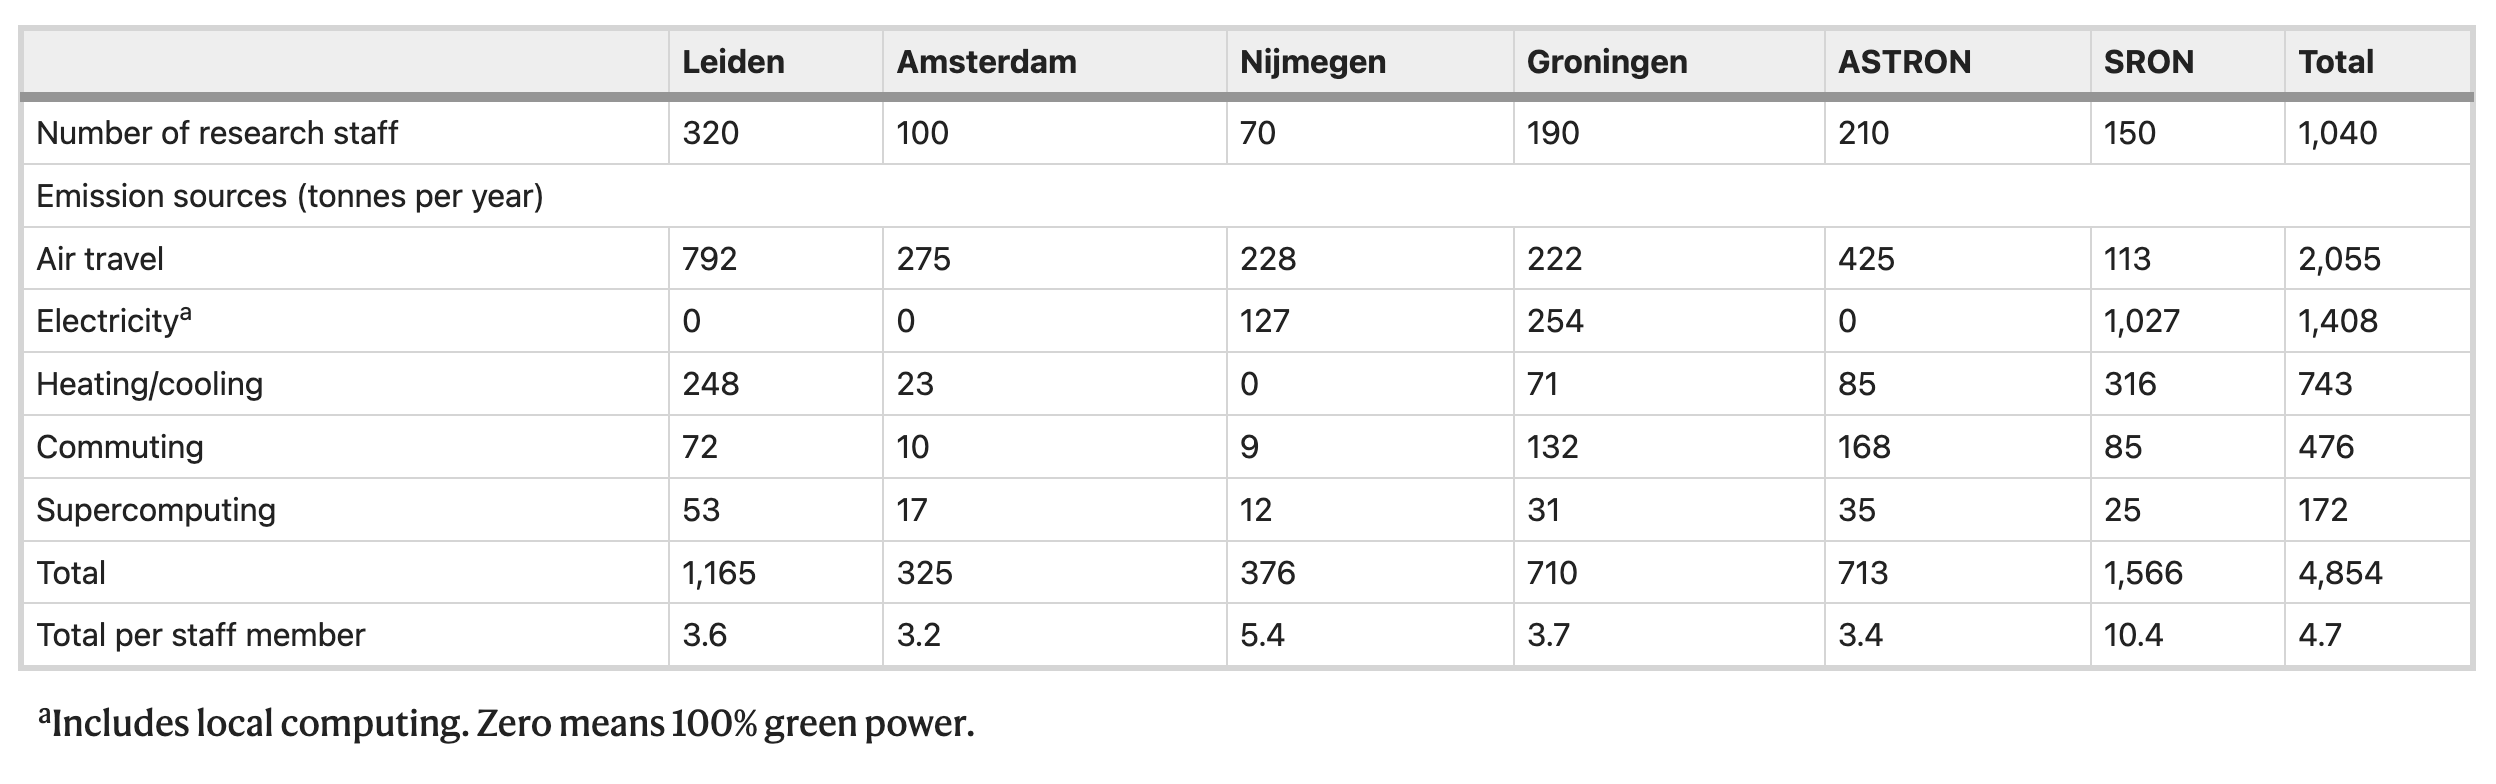 Energy data from different astronomy institutes in the Netherlands